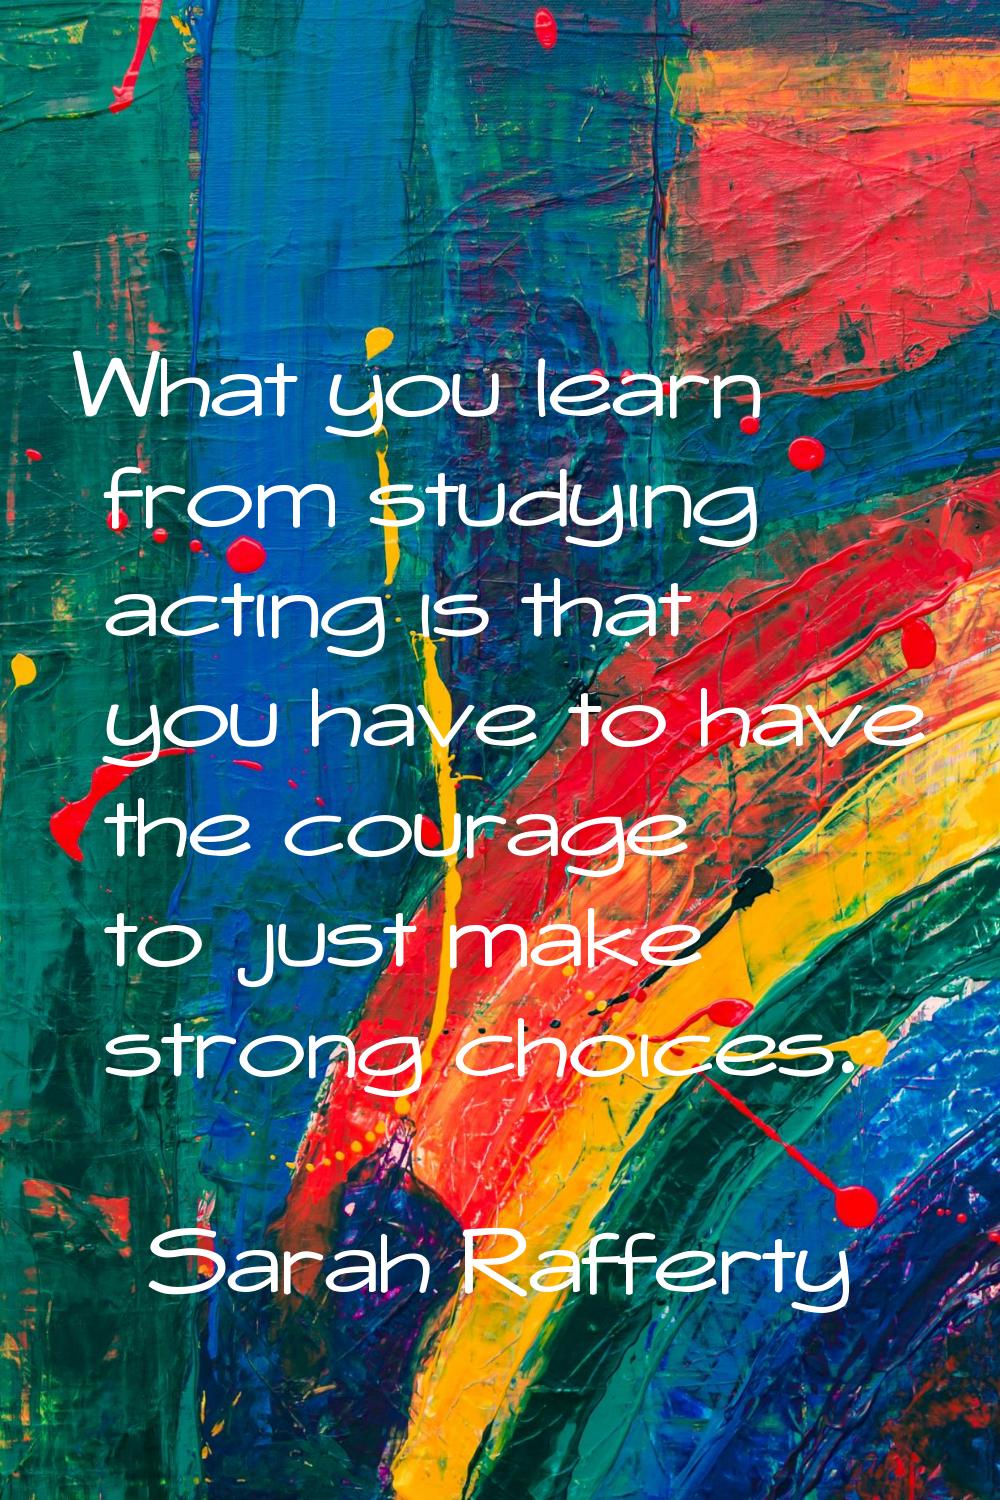 What you learn from studying acting is that you have to have the courage to just make strong choice